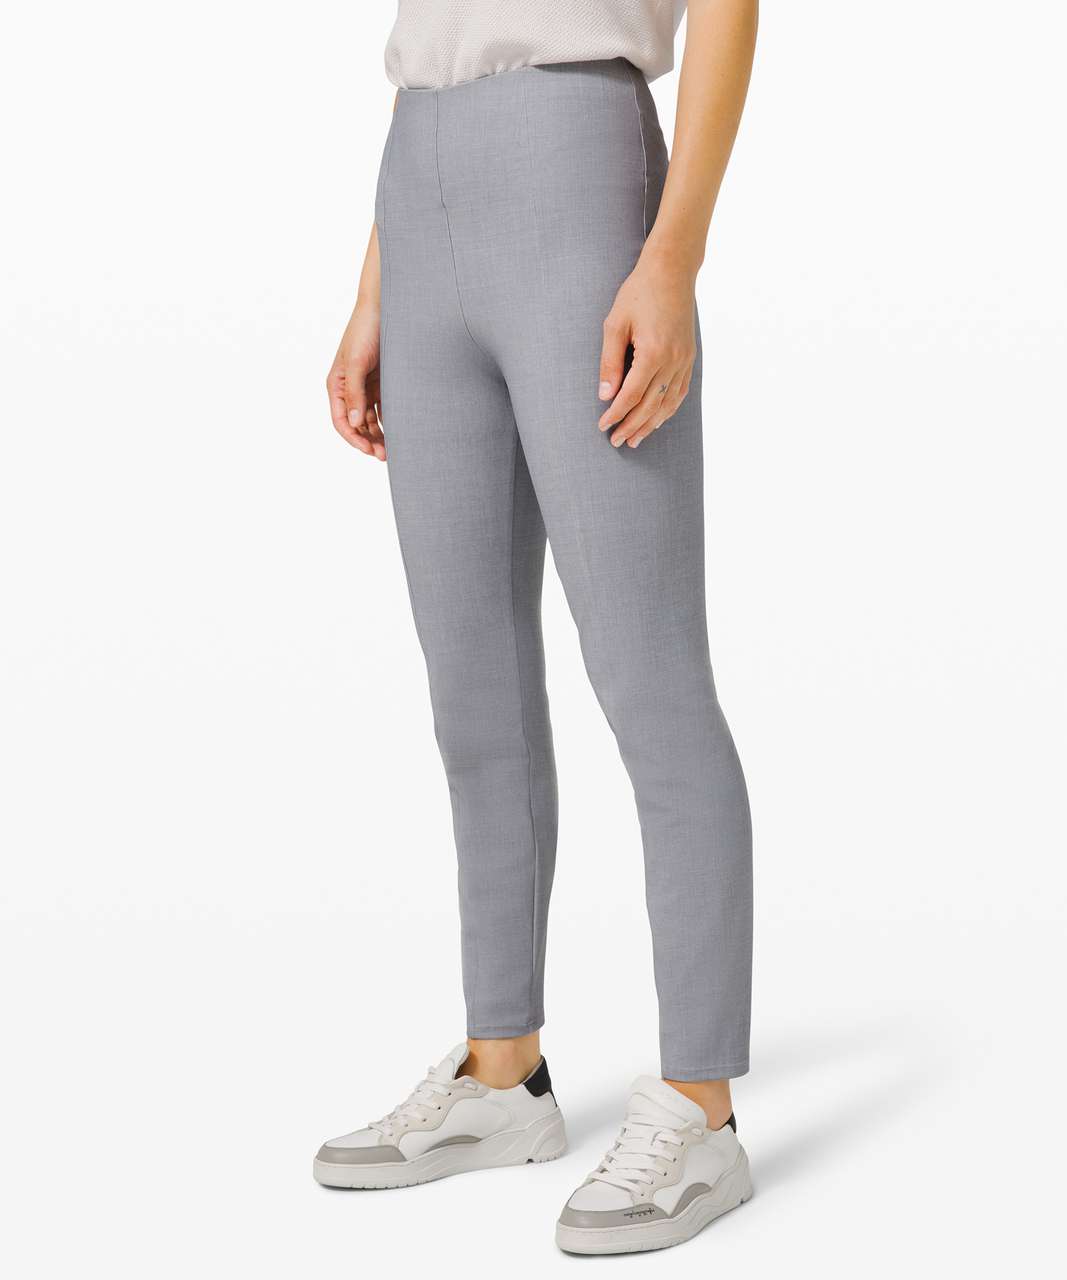 Lululemon Here to There High-Rise 7/8 Pant - Crosshatch Texture Magnet Grey Multi / Magnet Grey